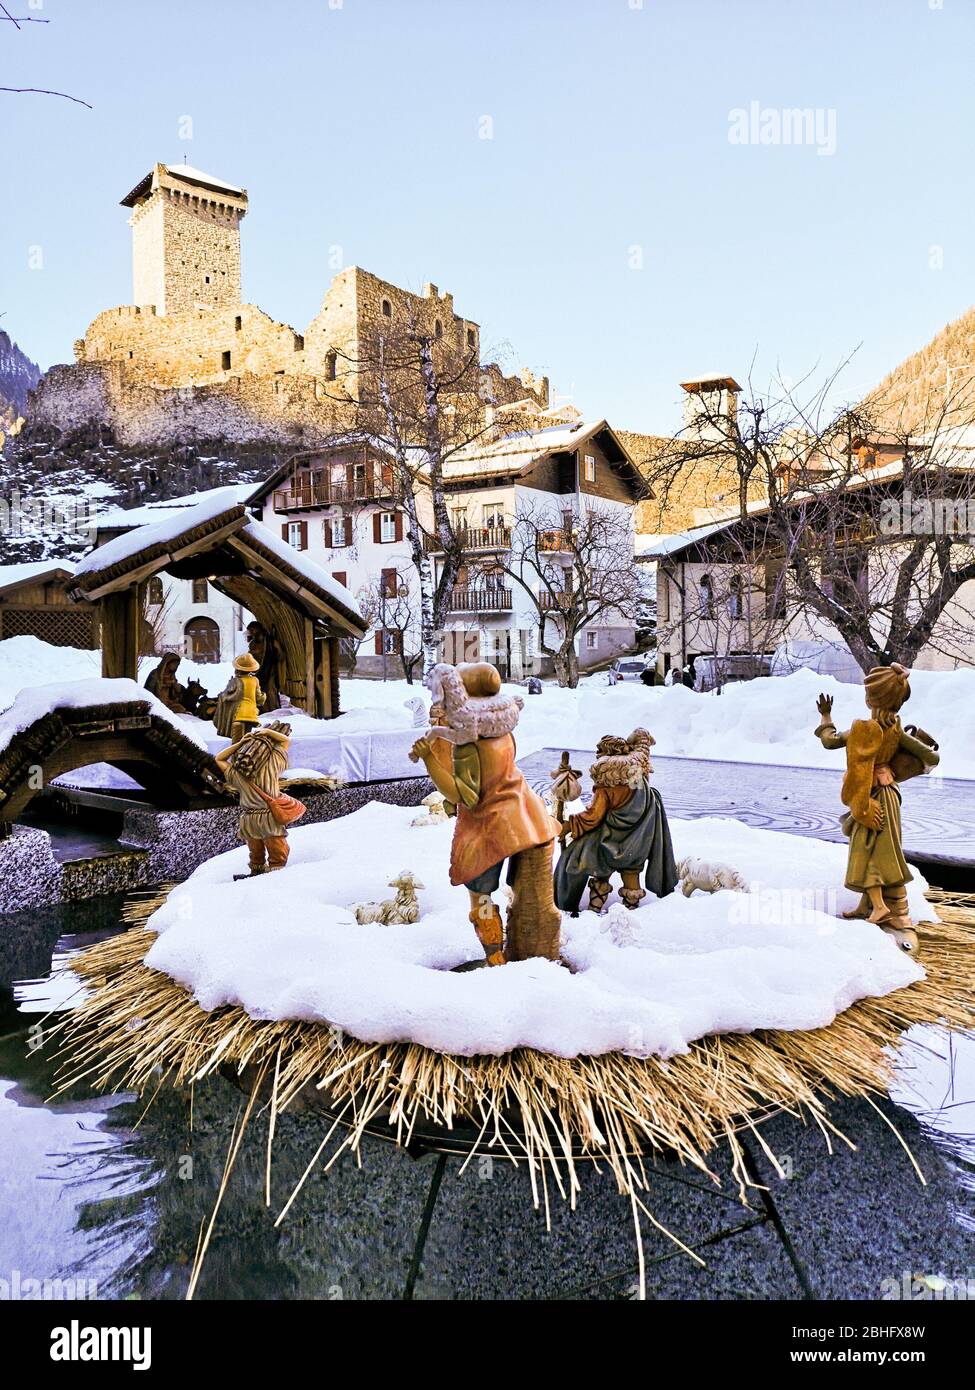 Ossana, Italy - December 26, 2019: Outdoor nativity scene covered in snow. In the background the famous castle of San Michele. Stock Photo